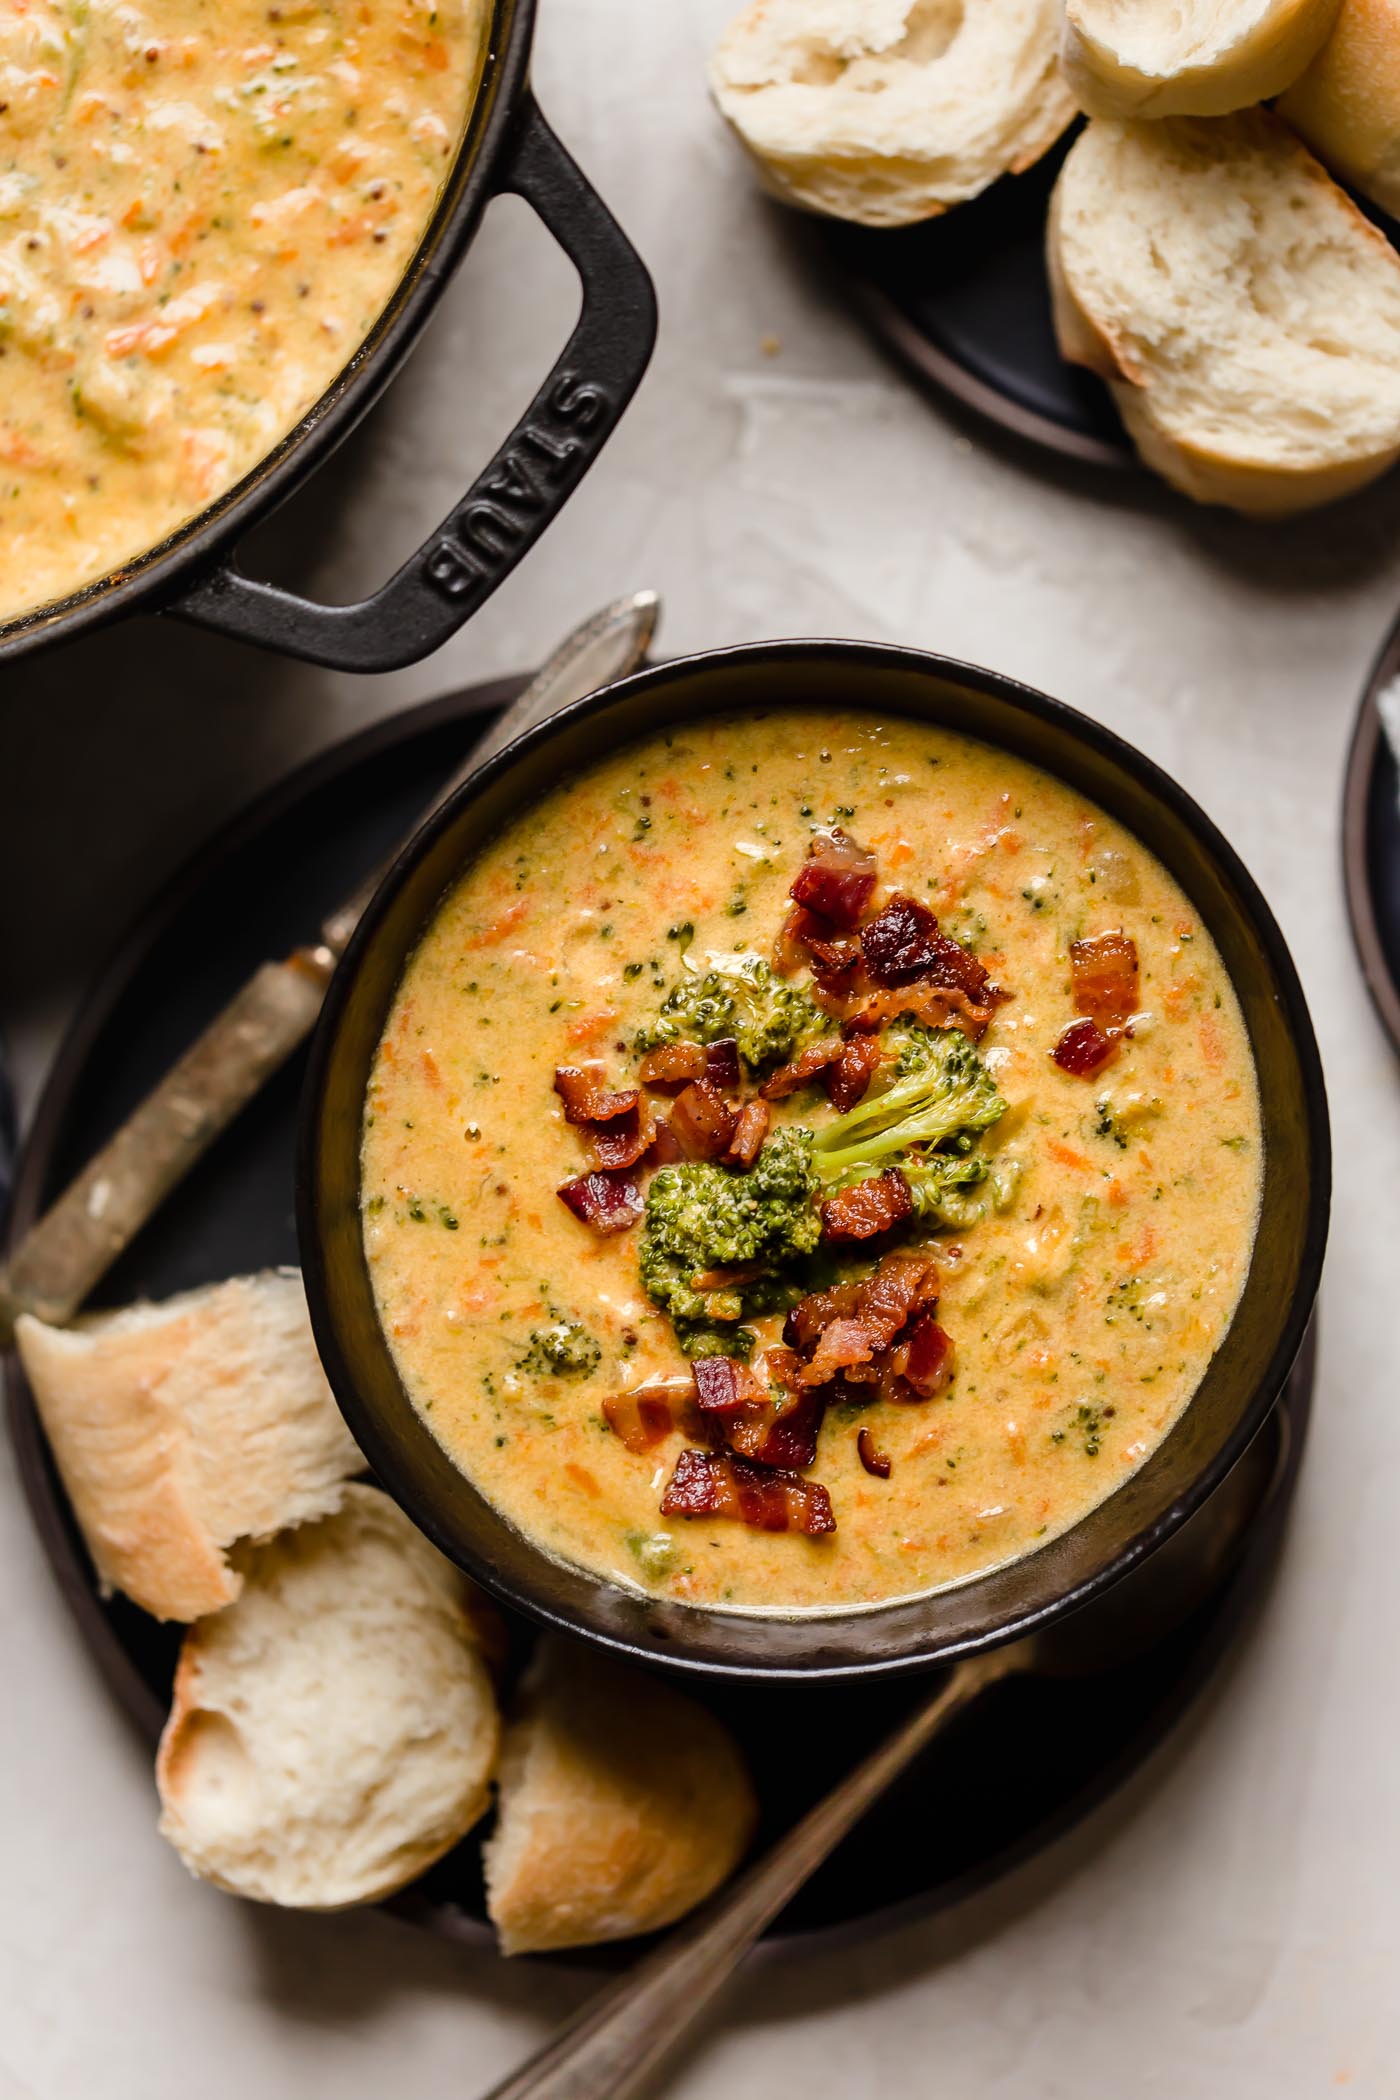 bacon beer cheese broccoli cheddar soup. a cross between two classic comforting soups, beer cheese soup & broccoli cheese soup, this bacon beer cheese broccoli cheddar soup is thick, luscious, creamy, & decadent made with @Tillamook Farmstyle Cut Sharp Cheddar Shredded Cheese. the ultimate comfort food dinner to warm you up on a cold night this winter! #playswellwithbutter #broccolicheddarsoup #broccolicheesesoup #bestbroccolicheesesoup #creamybroccolicheesesoup #beercheesesoup #bestbeercheesesoup #baconbeercheesesoup #comfortfood #comfortfoodrecipes #ad #Tillamook_Partner #TillamookCheese